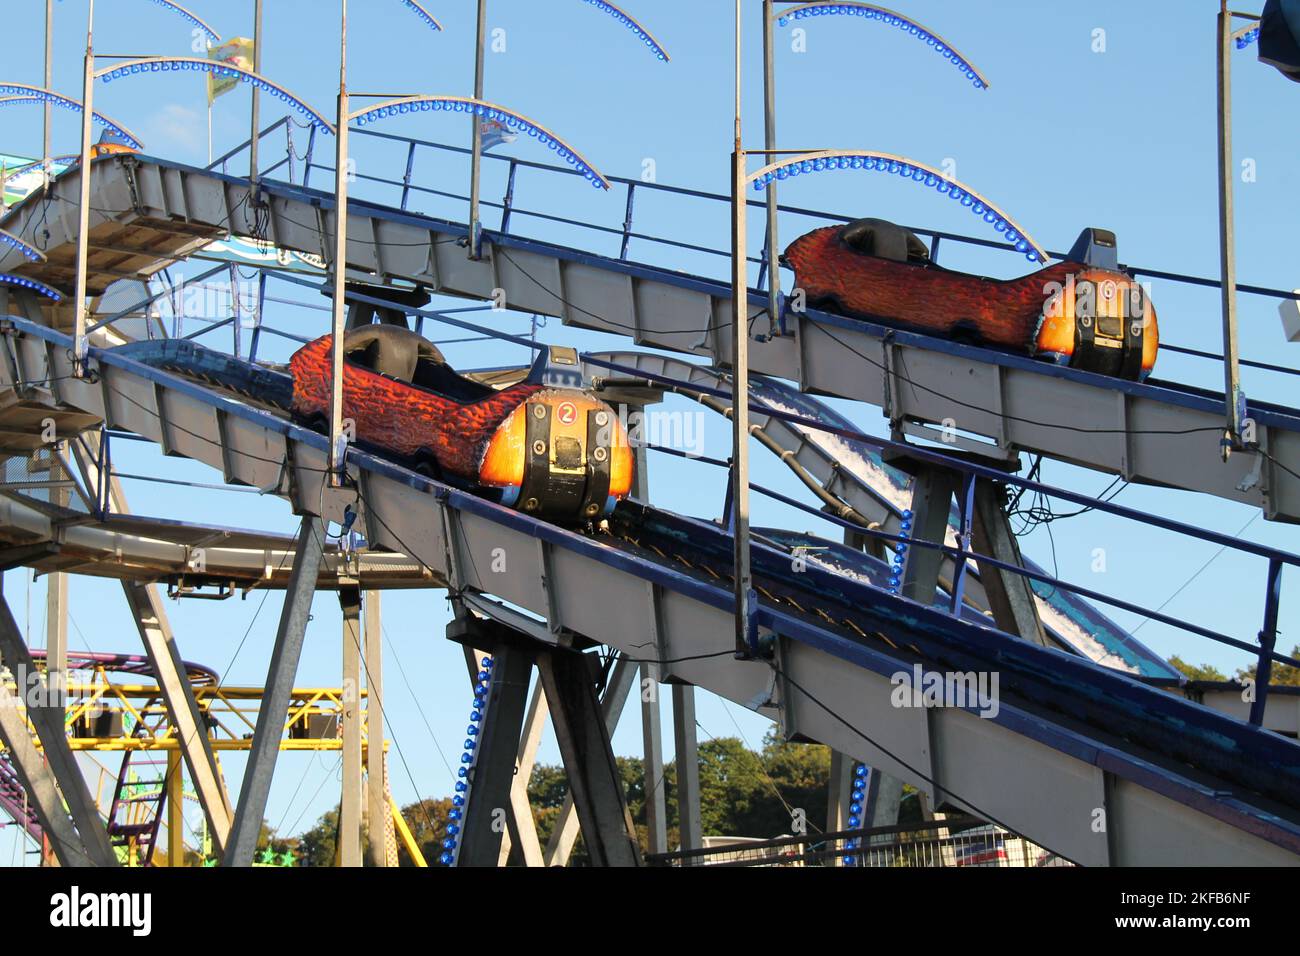 The Carriages of a Fun Fair Log Flume Ride. Stock Photo